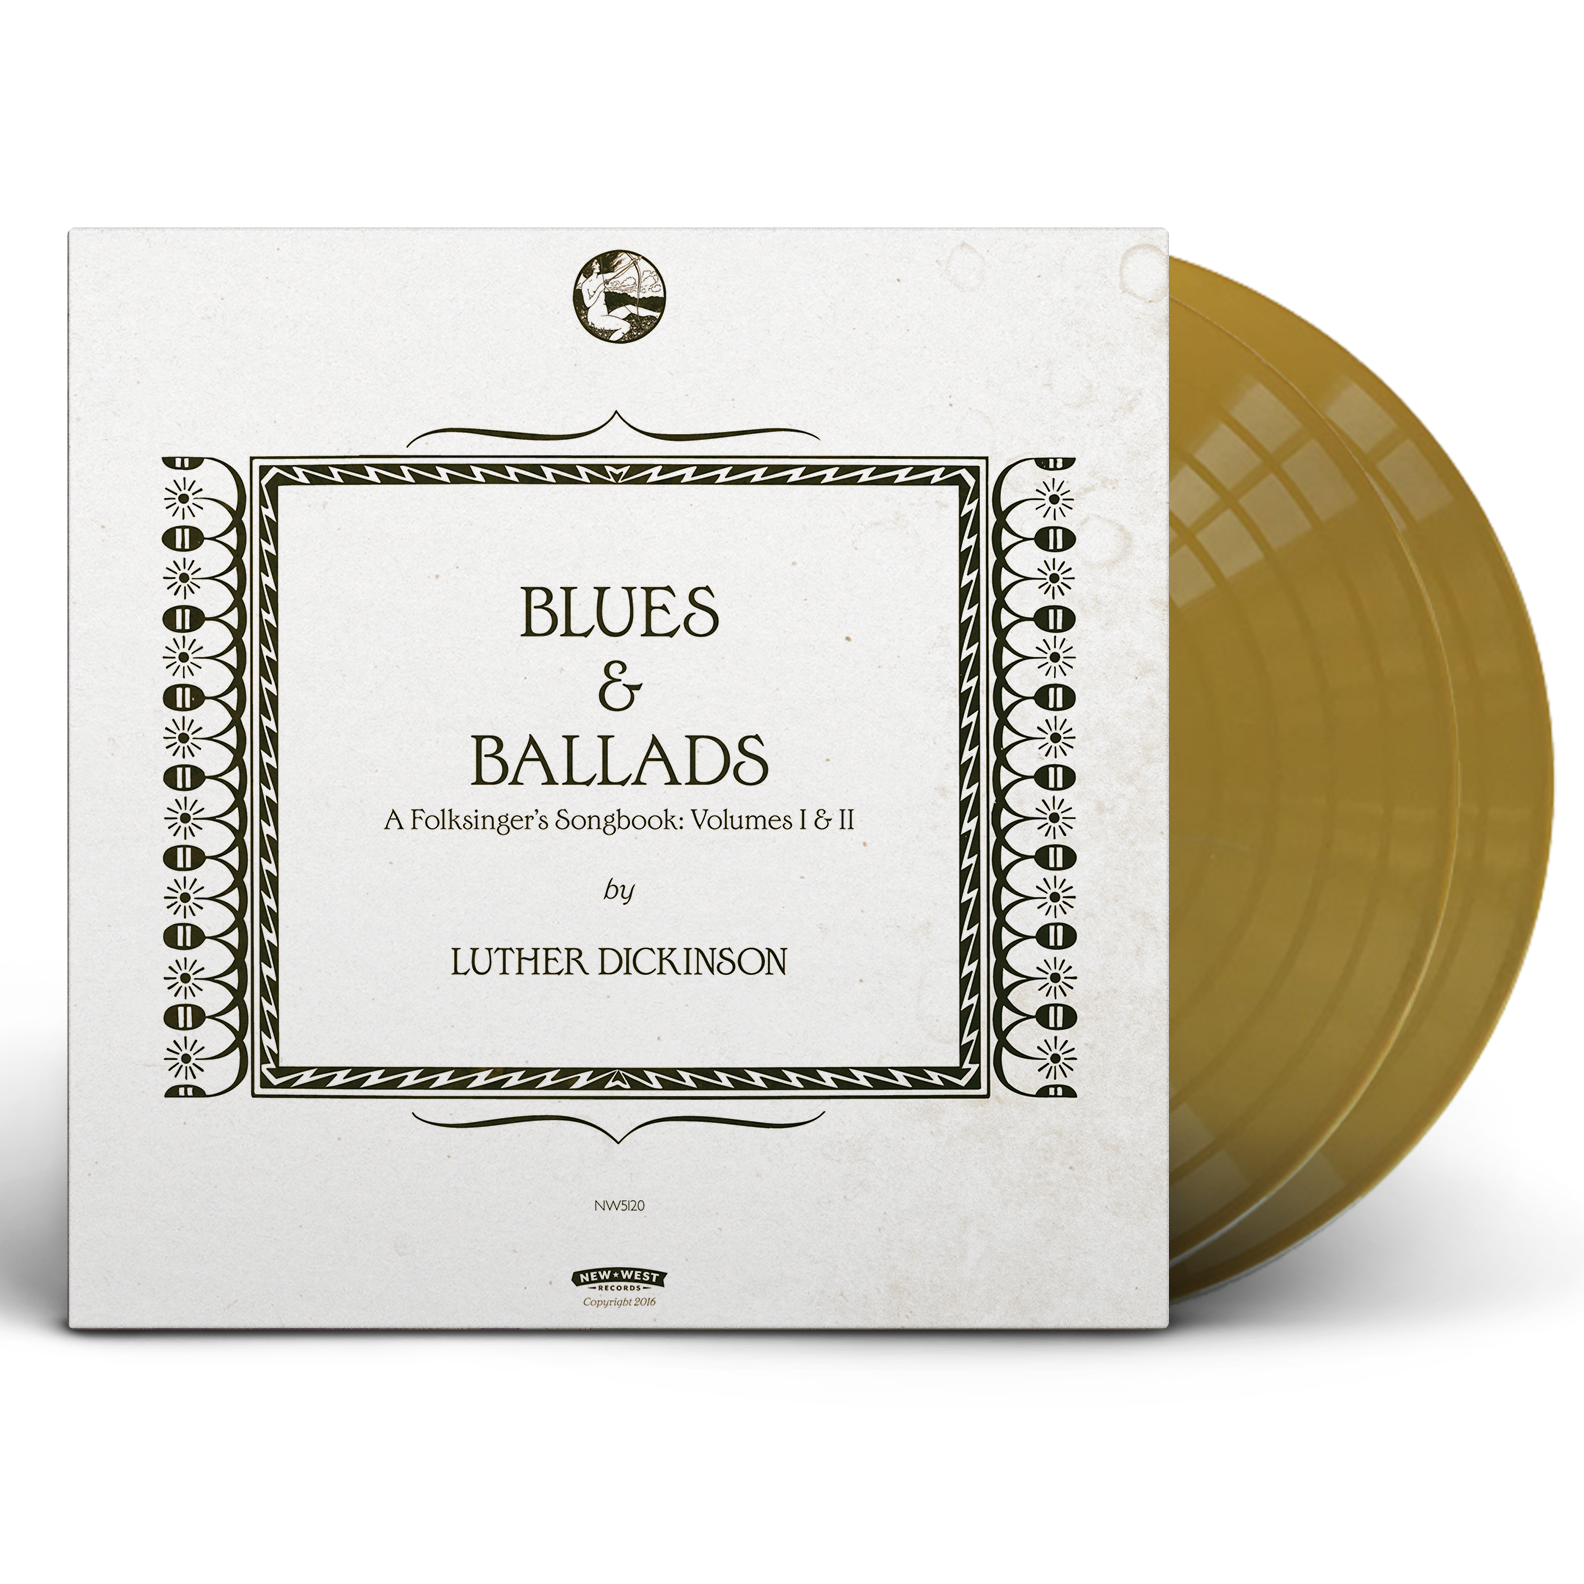 Luther Dickinson - Blues & Ballads (A Folksinger's Songbook) Volumes I & II [New West Exclusive Color Vinyl]